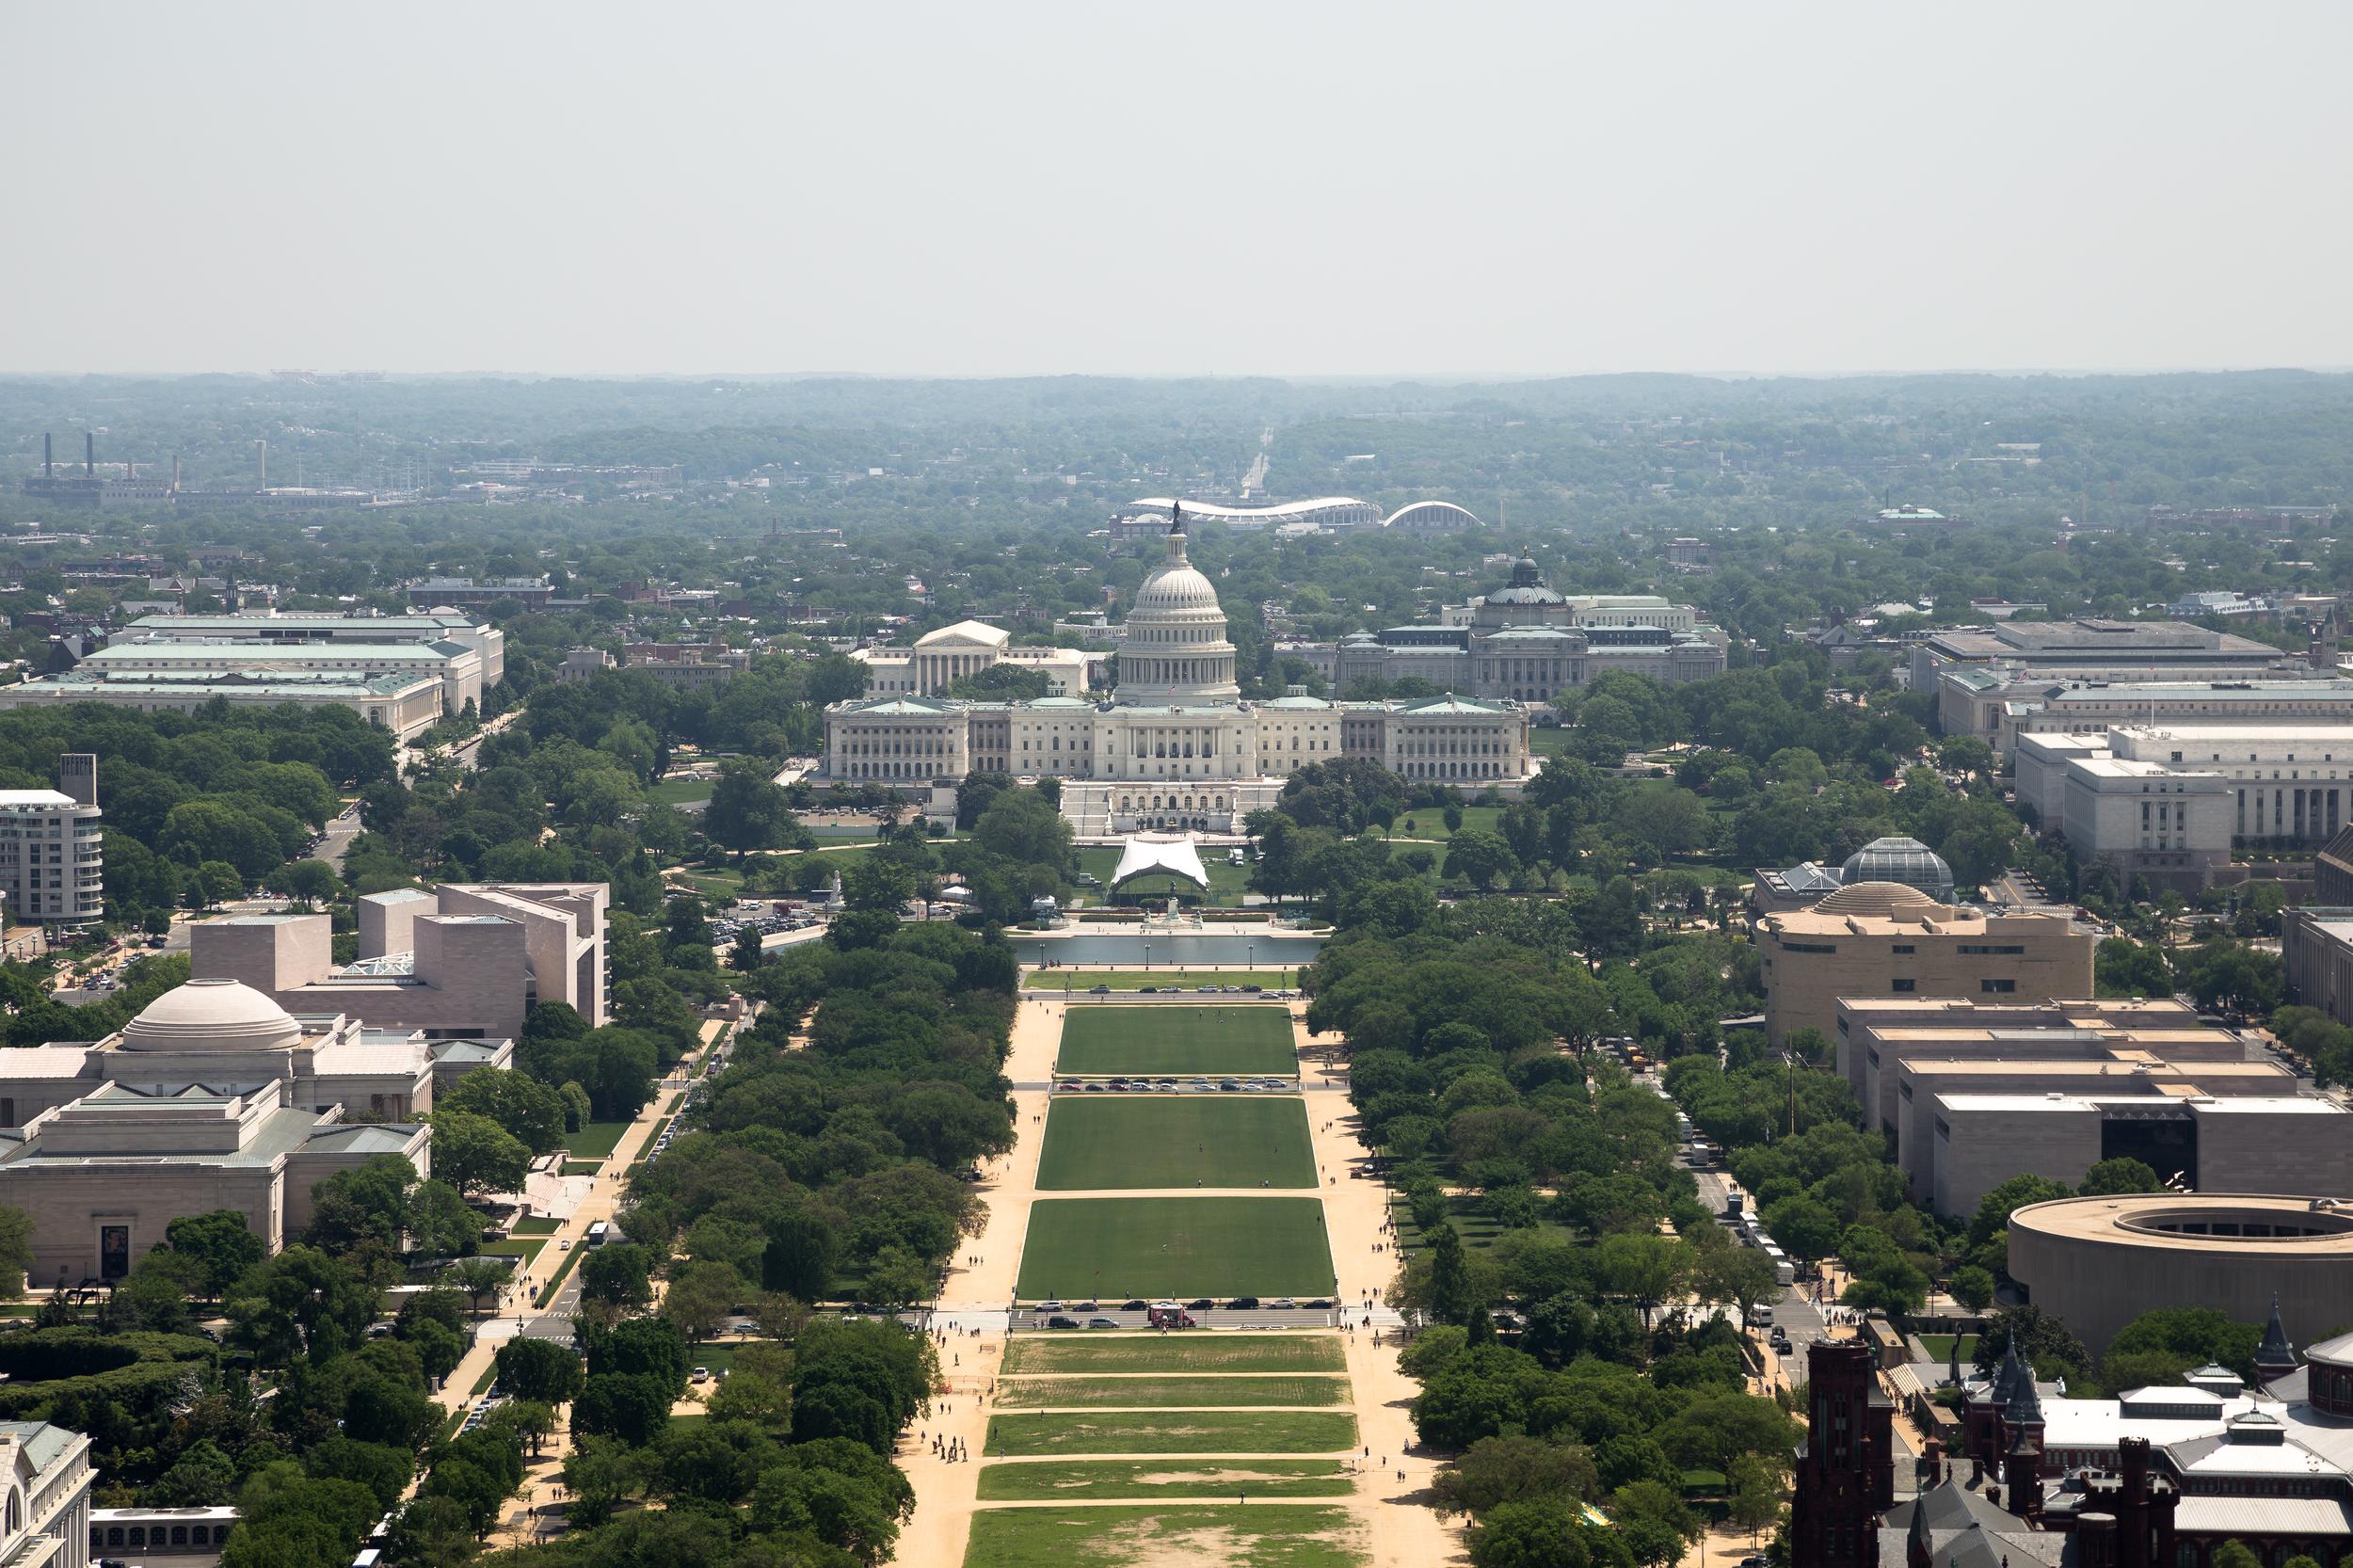 photos-from-the-top-of-the-washington-monument